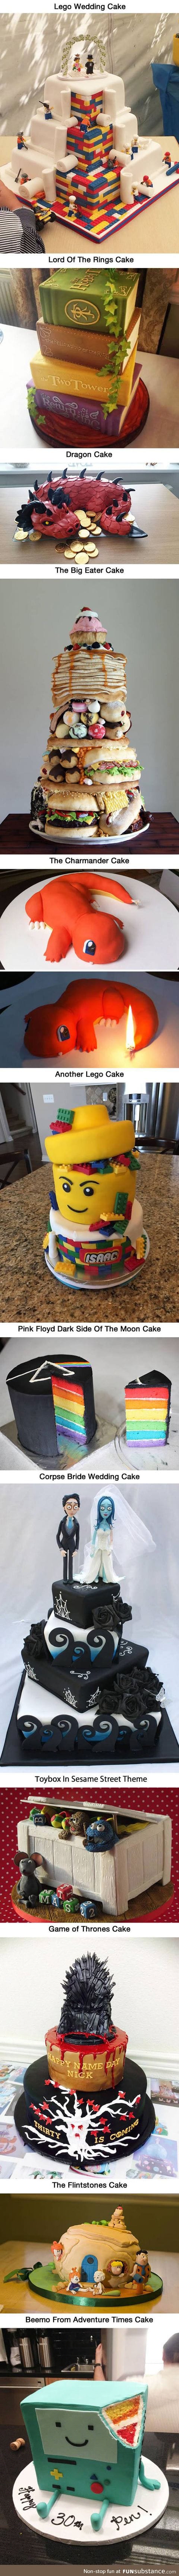 Cakes that are too cool to eat